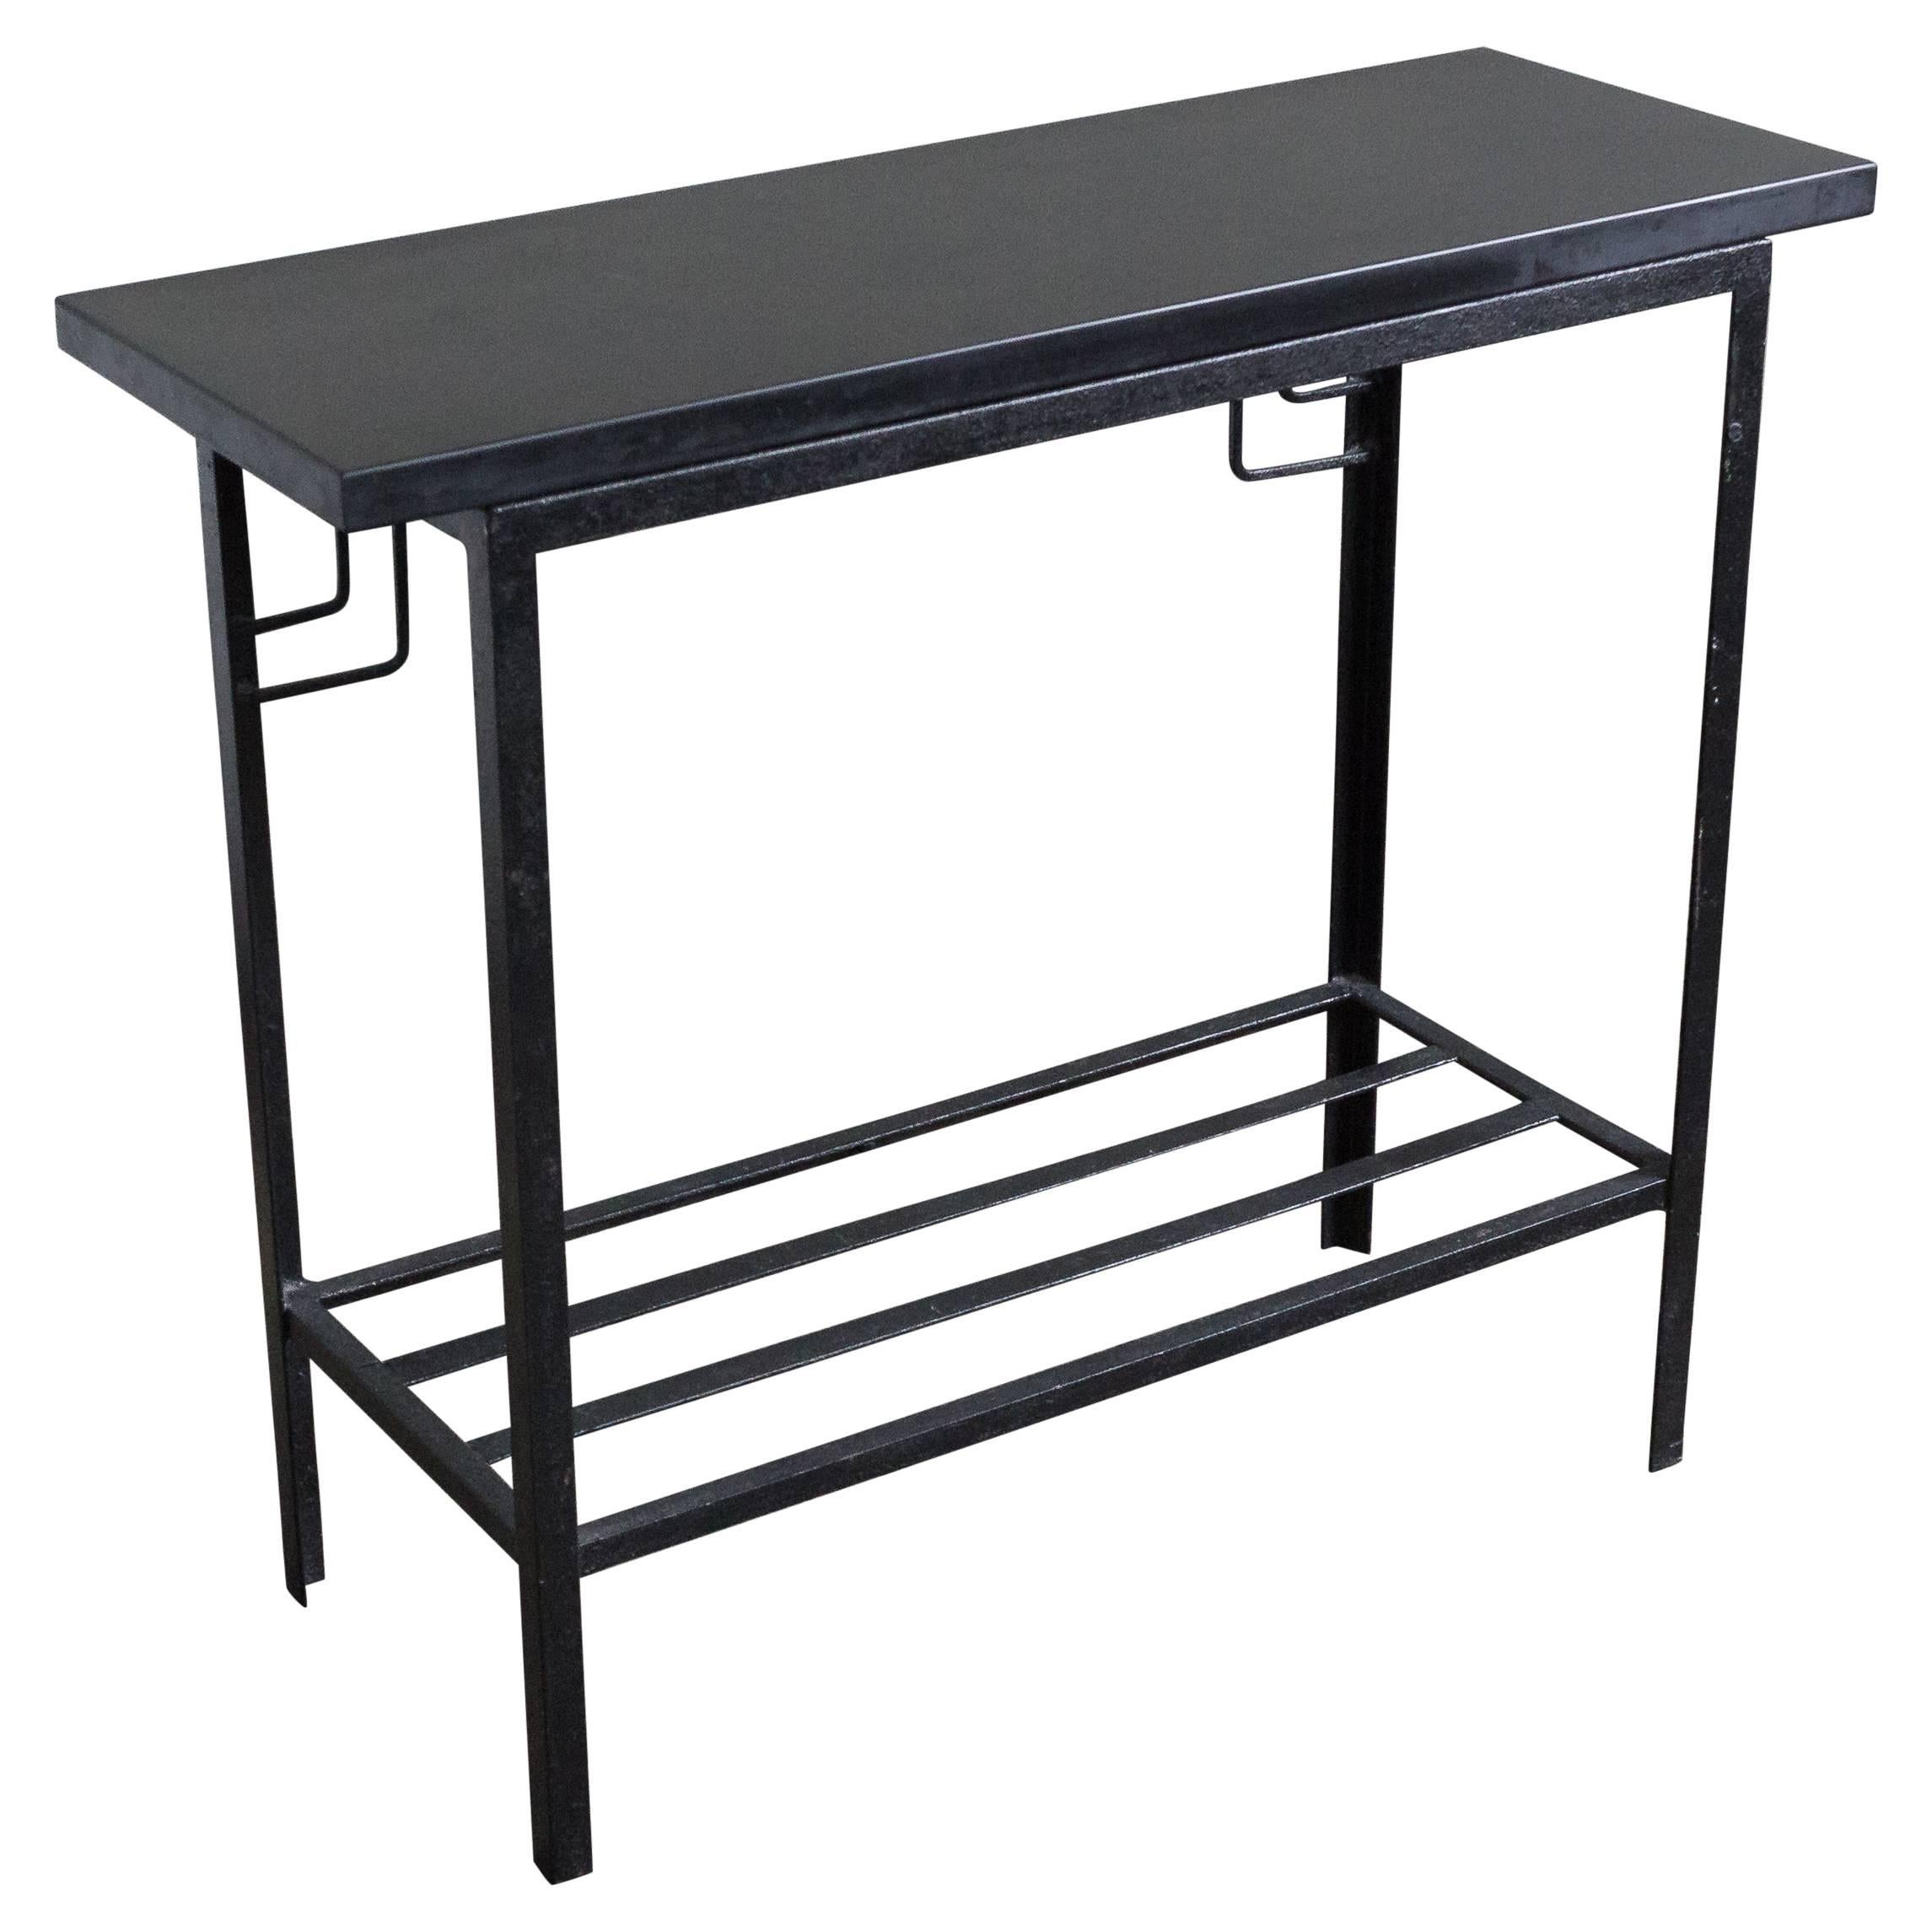 Painted Black Iron Console with Black Stone Top, Mid-Century Modern